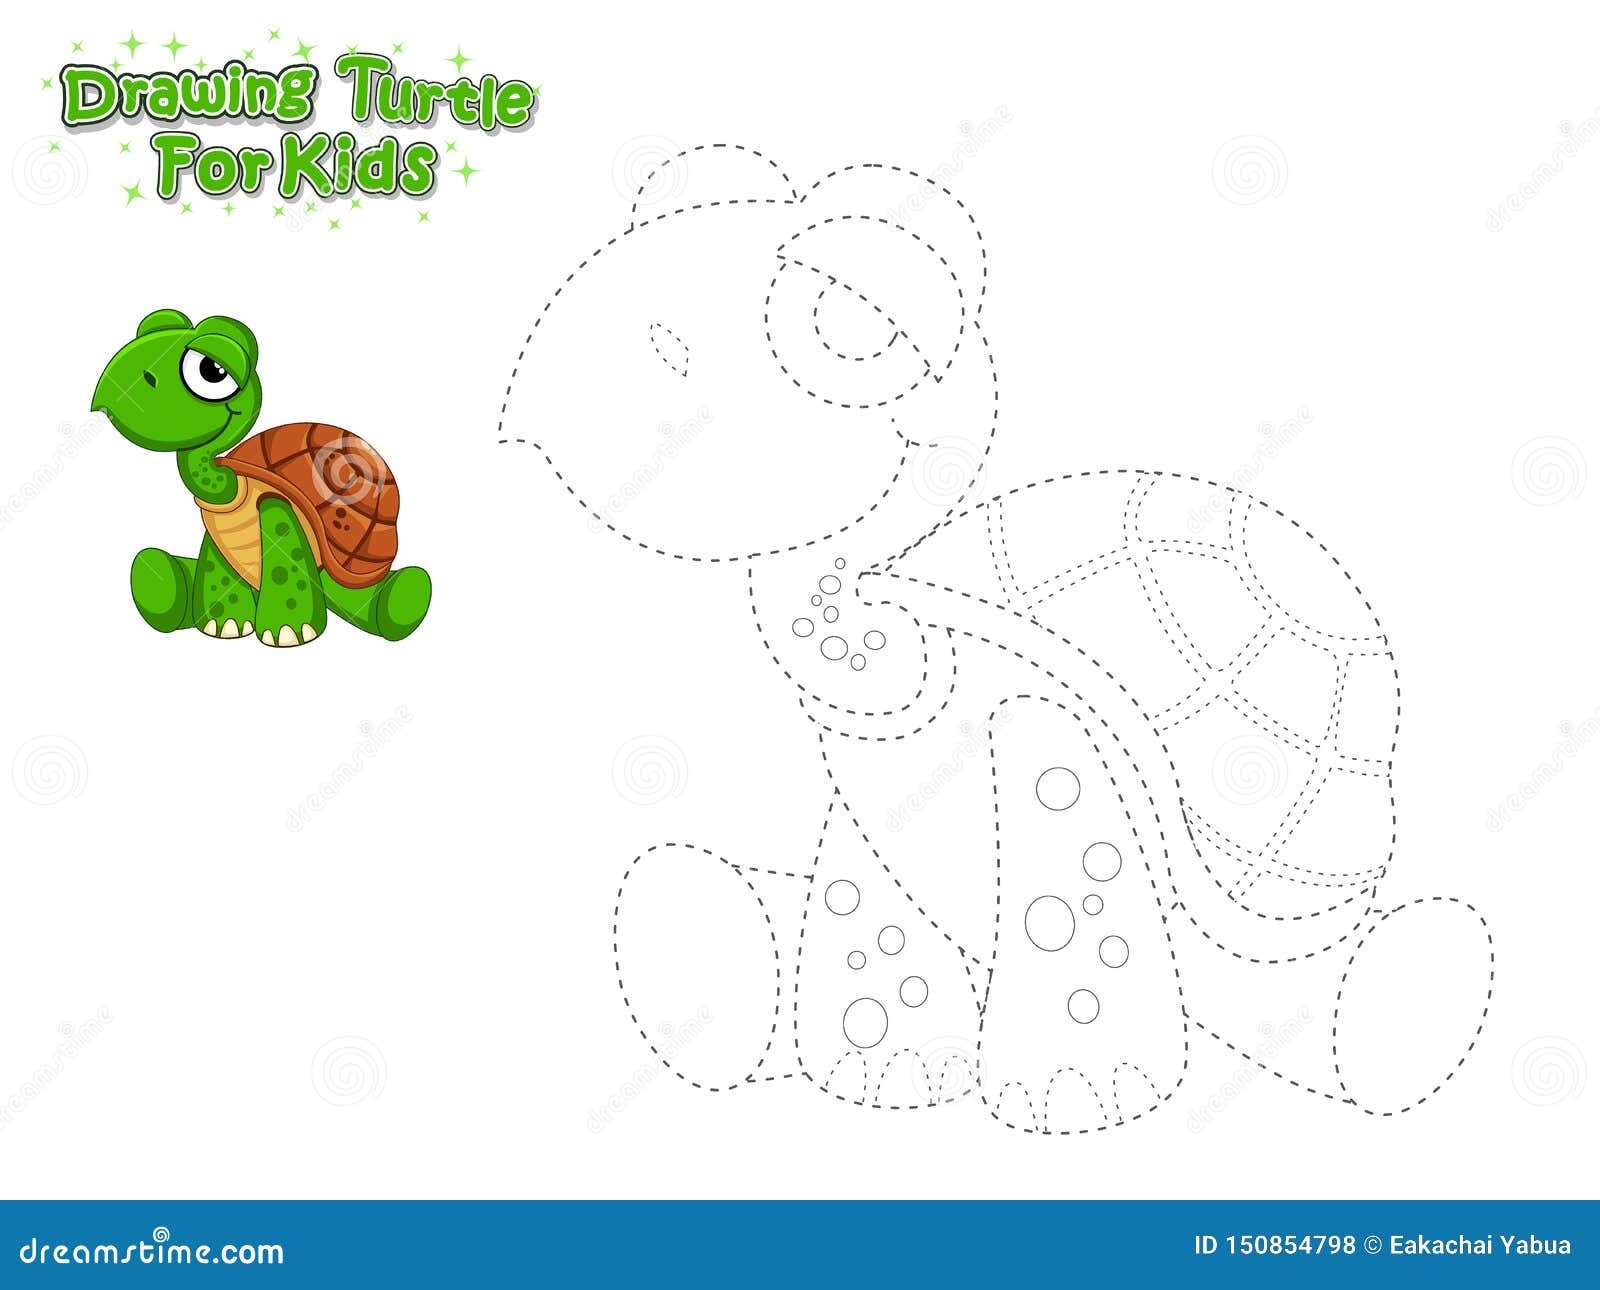 Vector Drawing and Paint Cute Cartoon Seahorse. Educational Game for Kids.  Vector Illustration with Cartoon Style Funny Sea Animal Ilustração do Vetor  - Ilustração de linha, educacional: 153519182